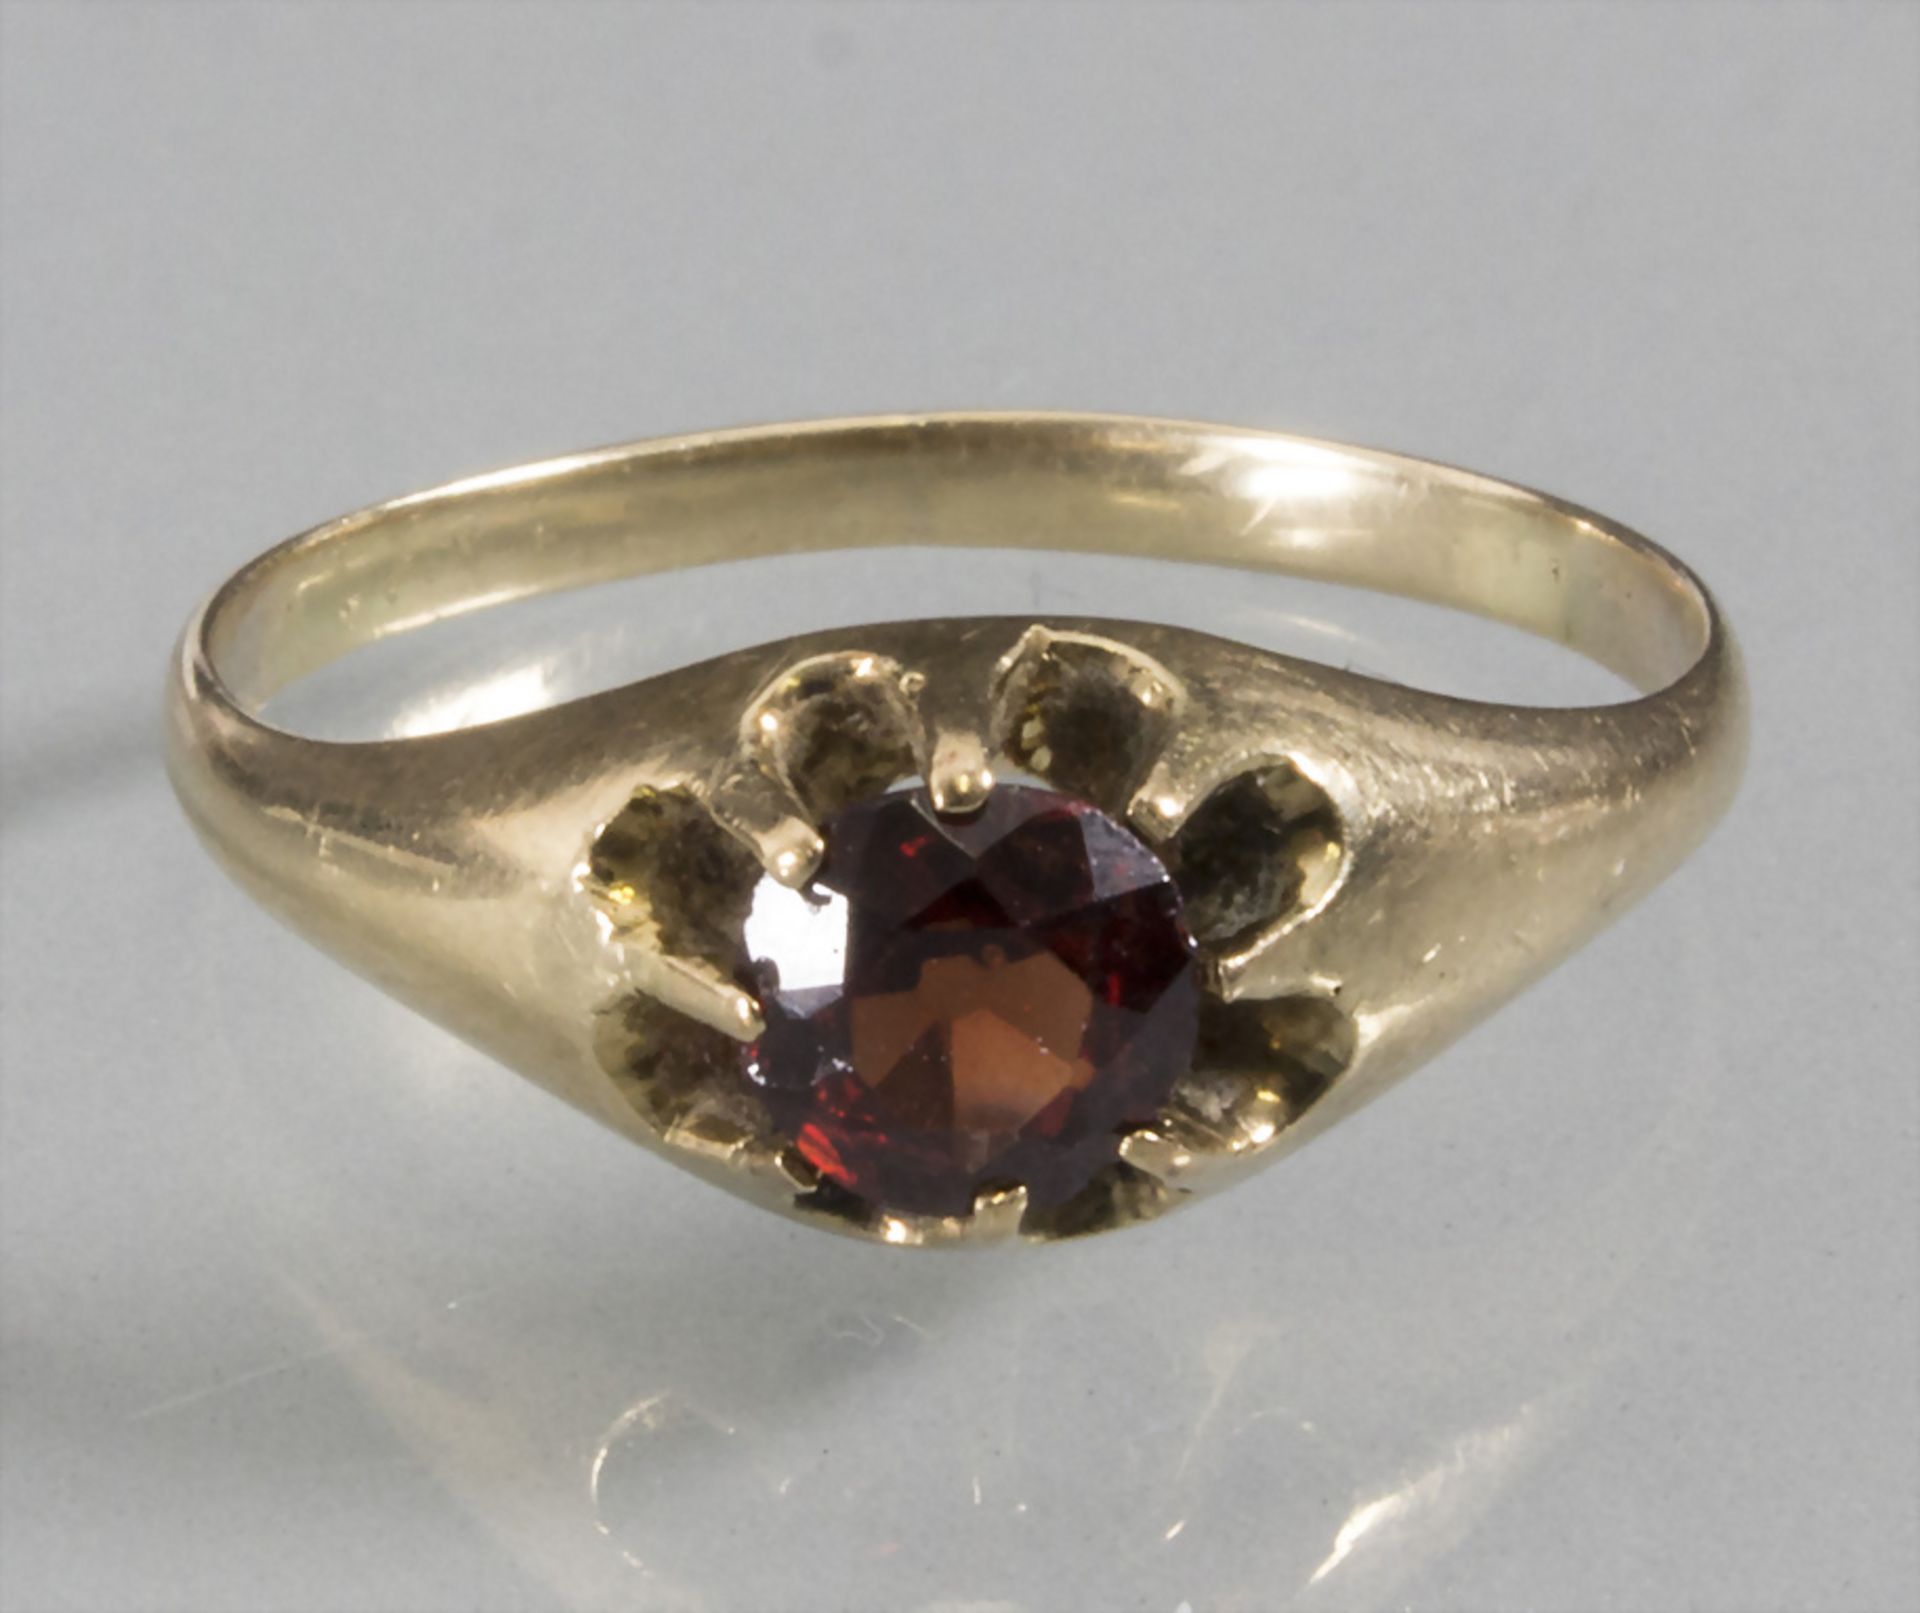 Damenring / A ladies 14ct gold ring with a ruby, um 1900